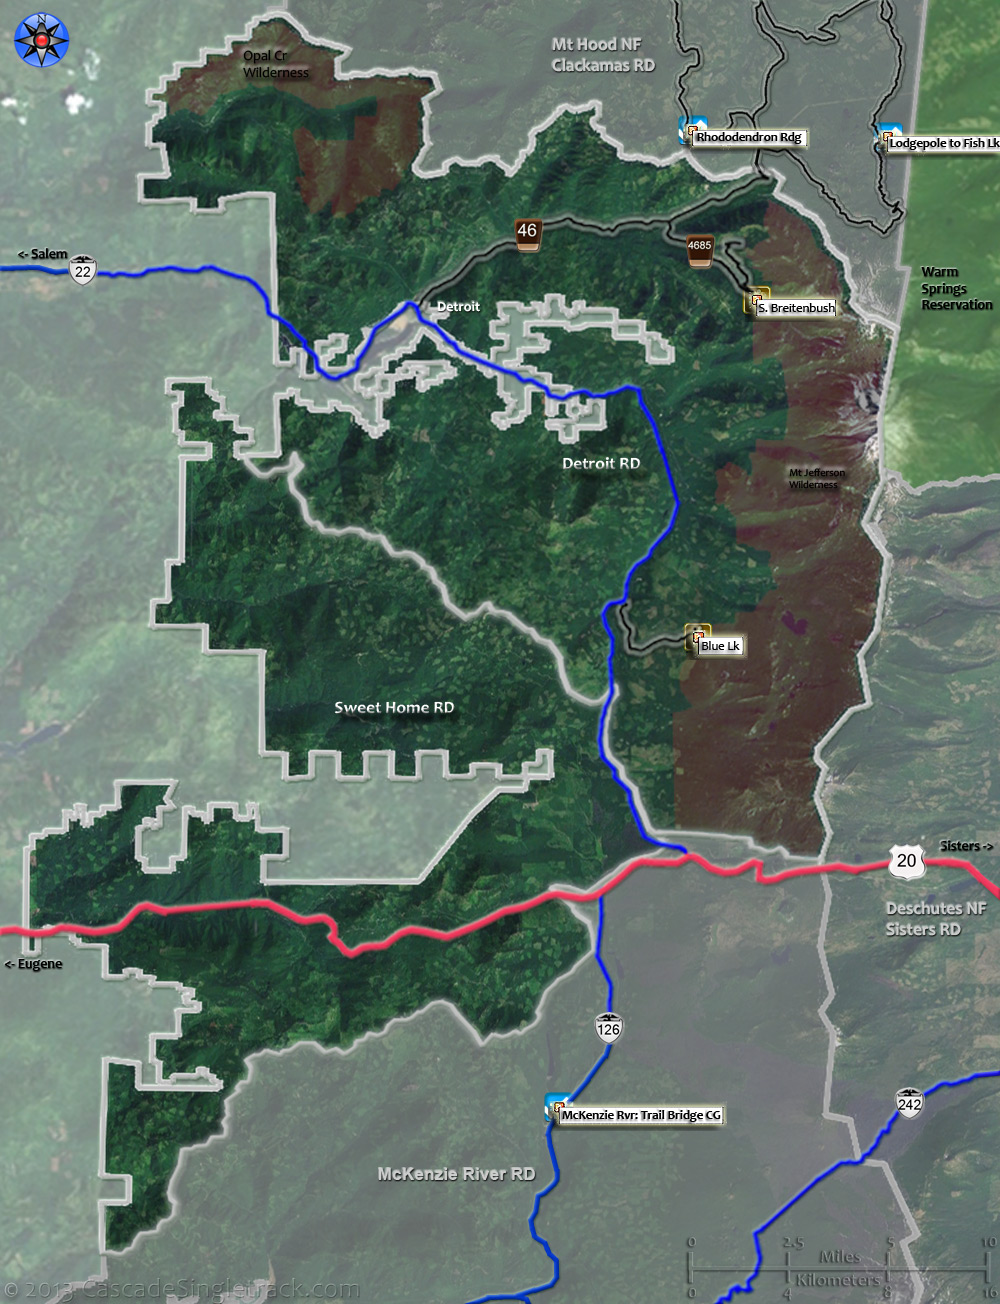 Willamette National Forest Detroit and Sweet Home Mountain Bike and Hiking Trails